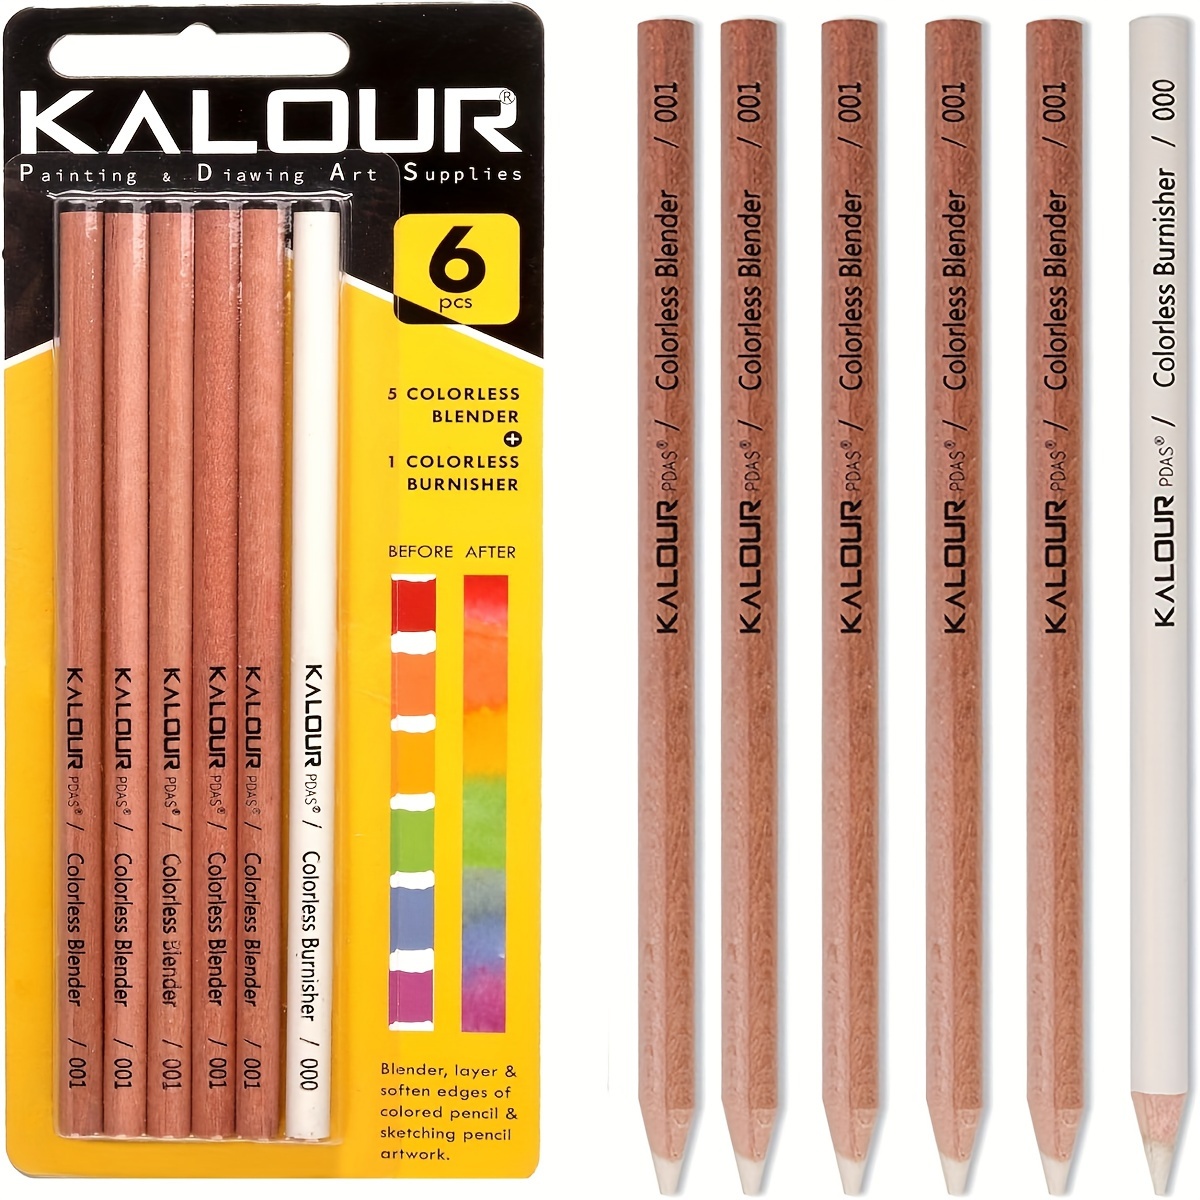 

Kalour Blender & Burnisher Pencils Set: Non-pigmented, Wax-based, Perfect For Blending & Softening Edges, Ideal For Colored Pencils (6 Pencils Total)